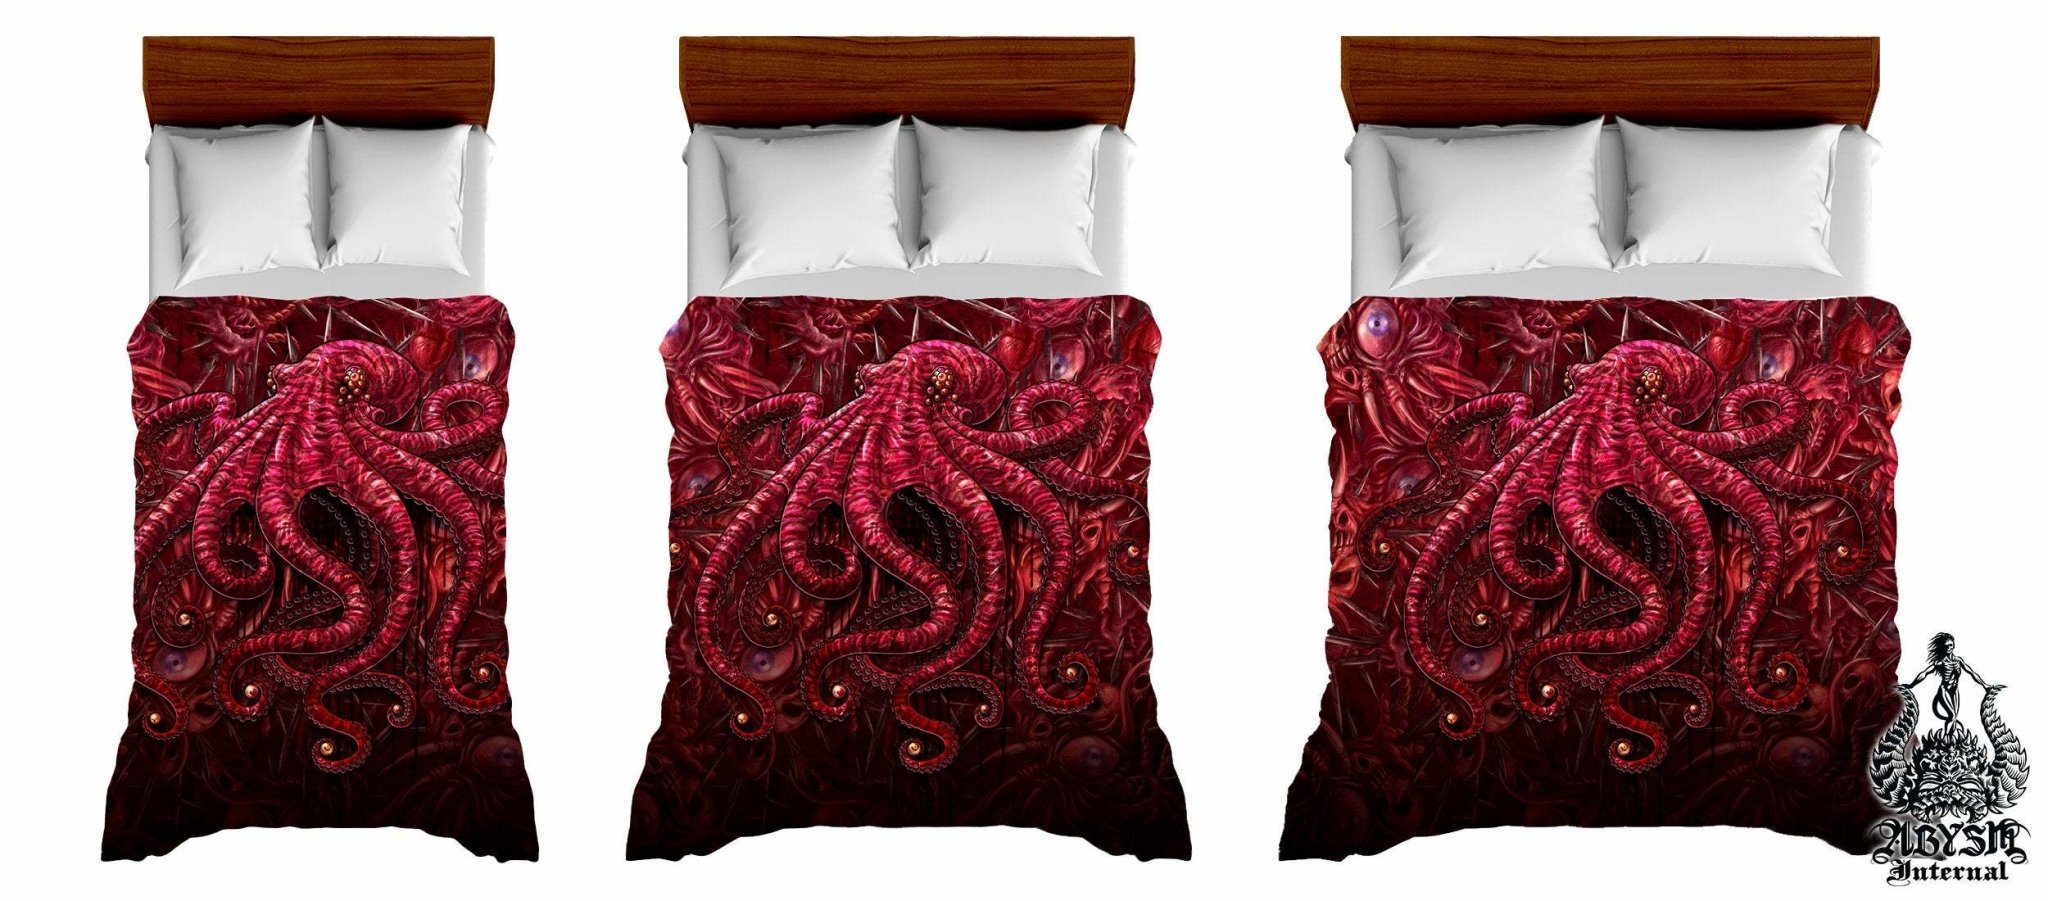 Horror Bedding Set, Comforter and Duvet, Monster Octopus, Halloween Bed Cover and Beach Bedroom Decor, King, Queen and Twin Size - Gore and Blood - Abysm Internal